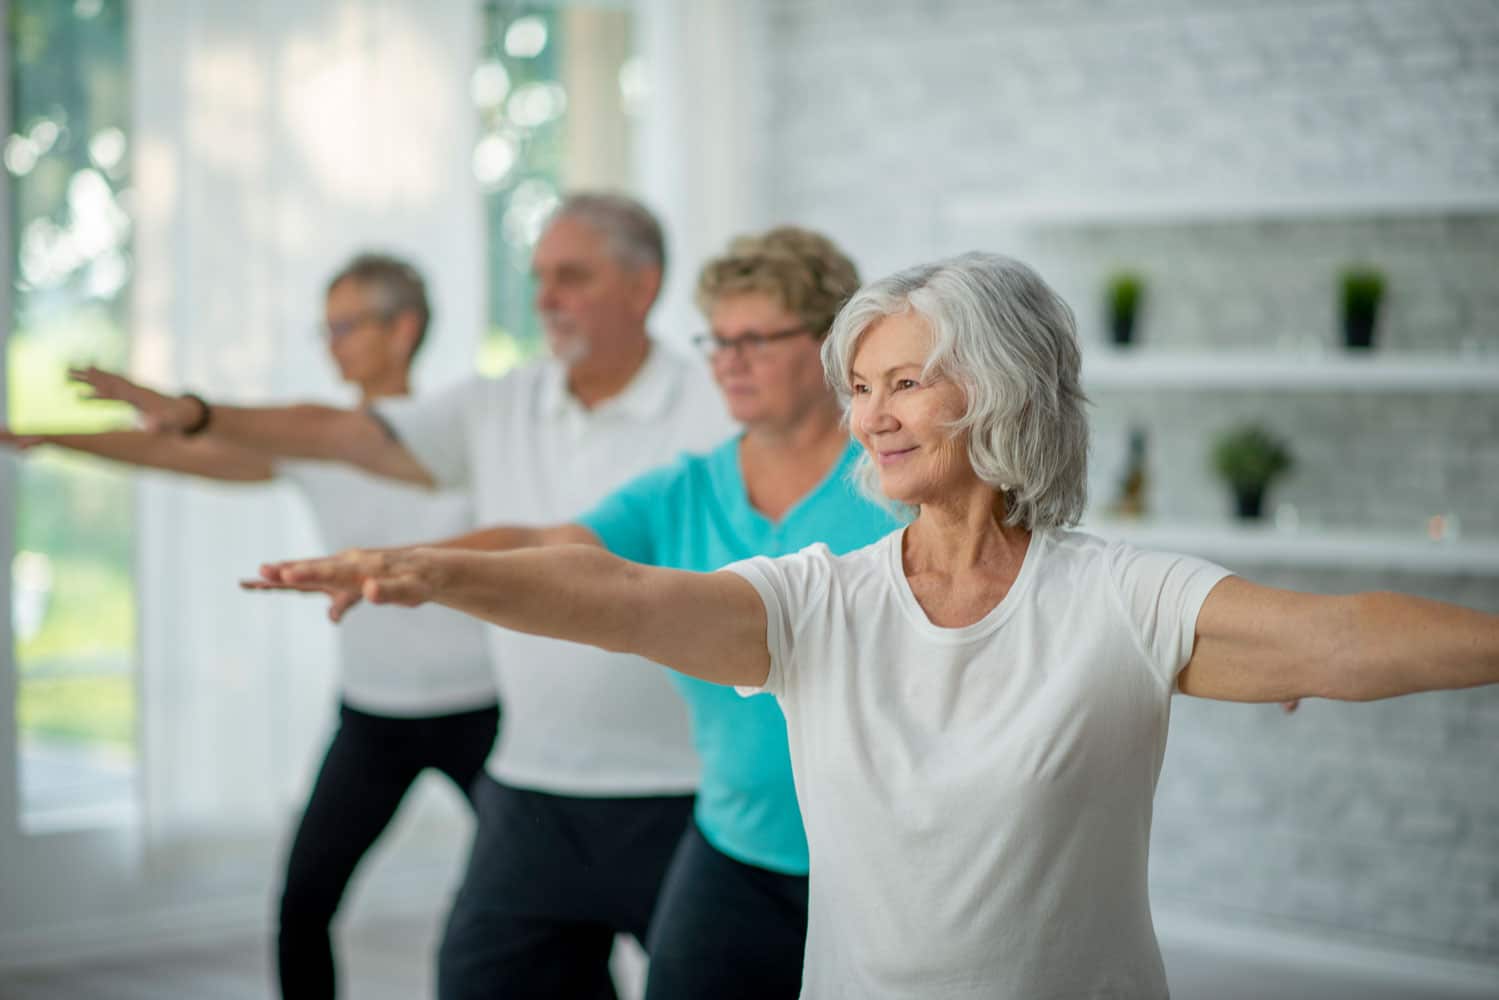 A small group of seniors stand evenly spready apart in a studio with their hands extended as they stretch and balance during a Tai Chi class. They are each dressed comfortably and are focused on the movements.